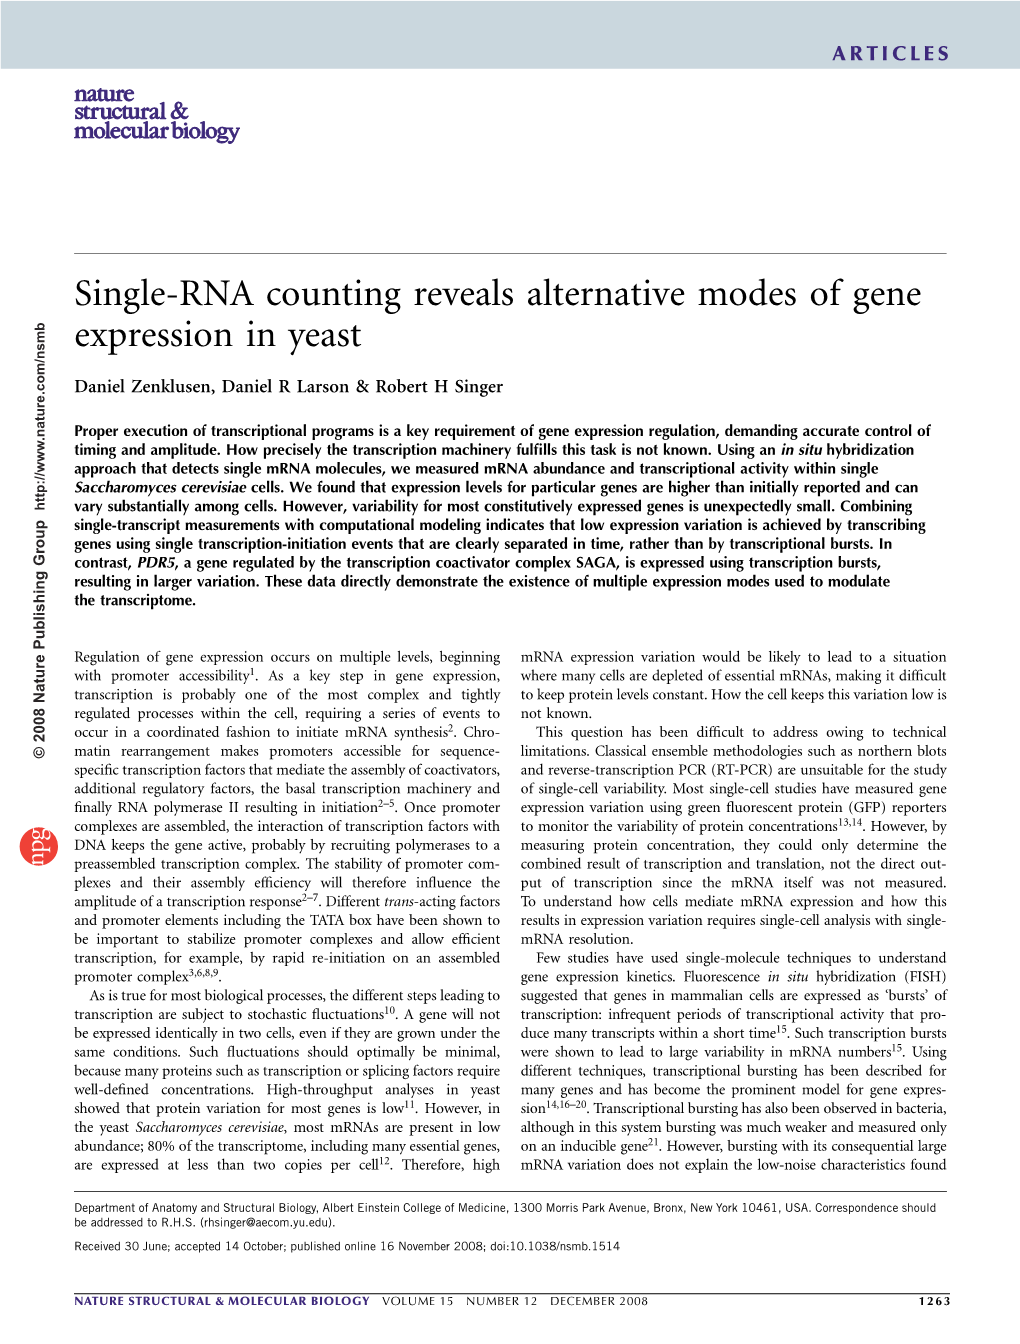 Single-RNA Counting Reveals Alternative Modes of Gene Expression in Yeast